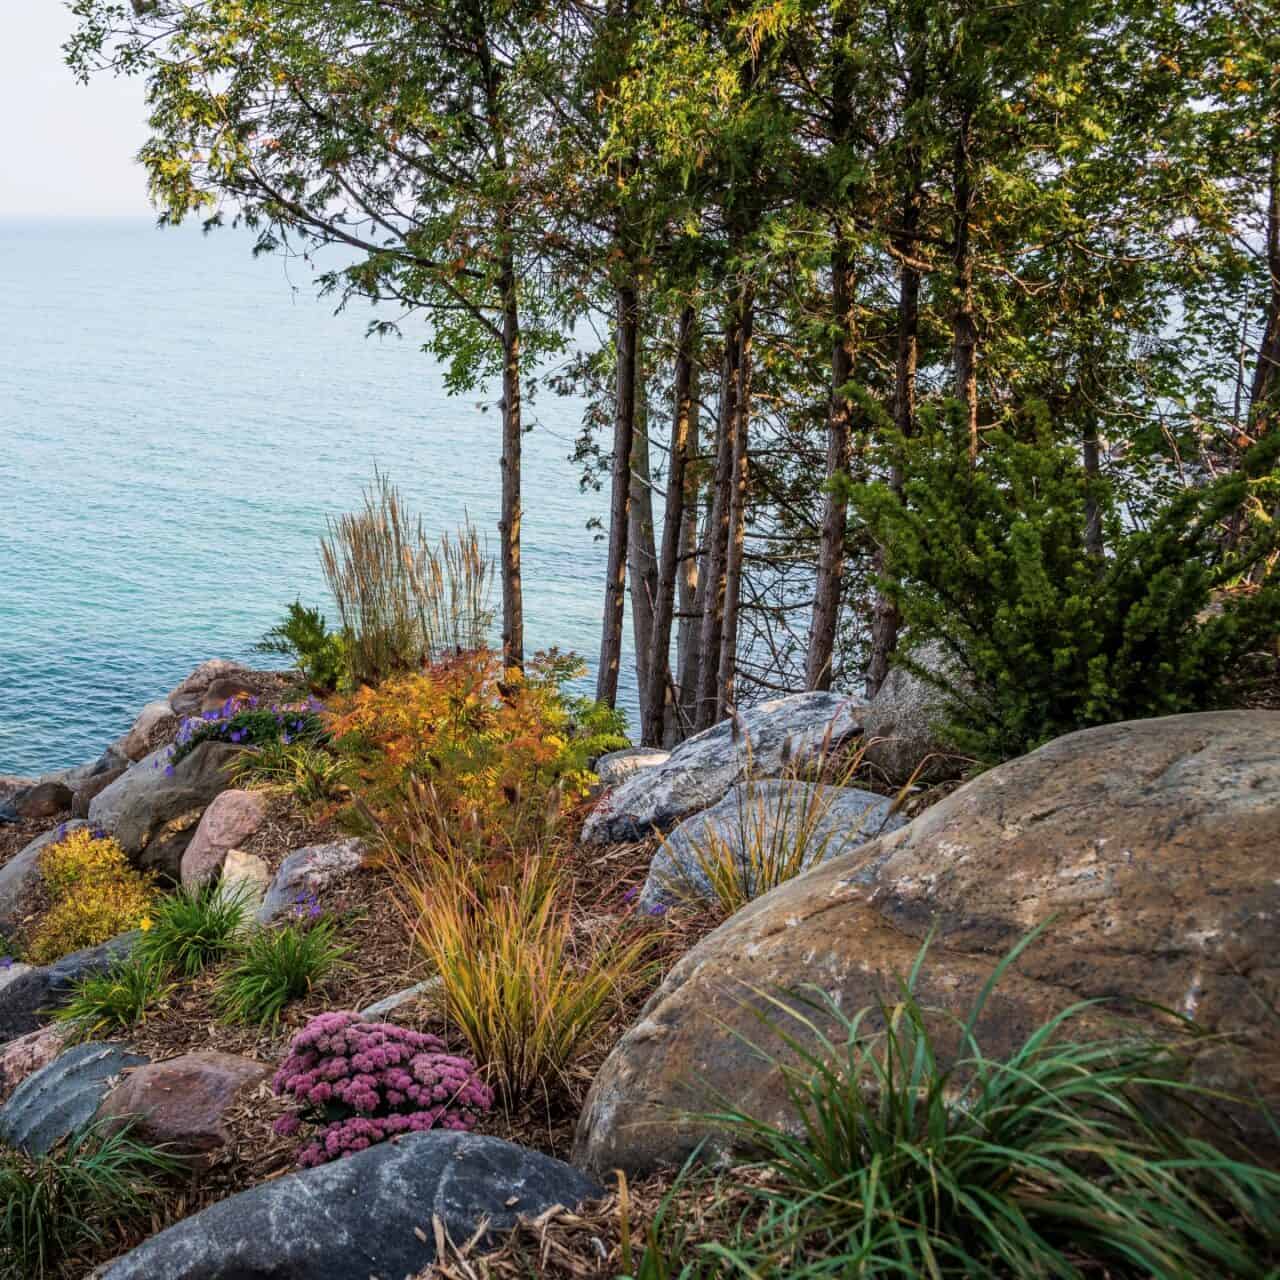 Native flowers and shrubs help restore a diverse natural shoreline.